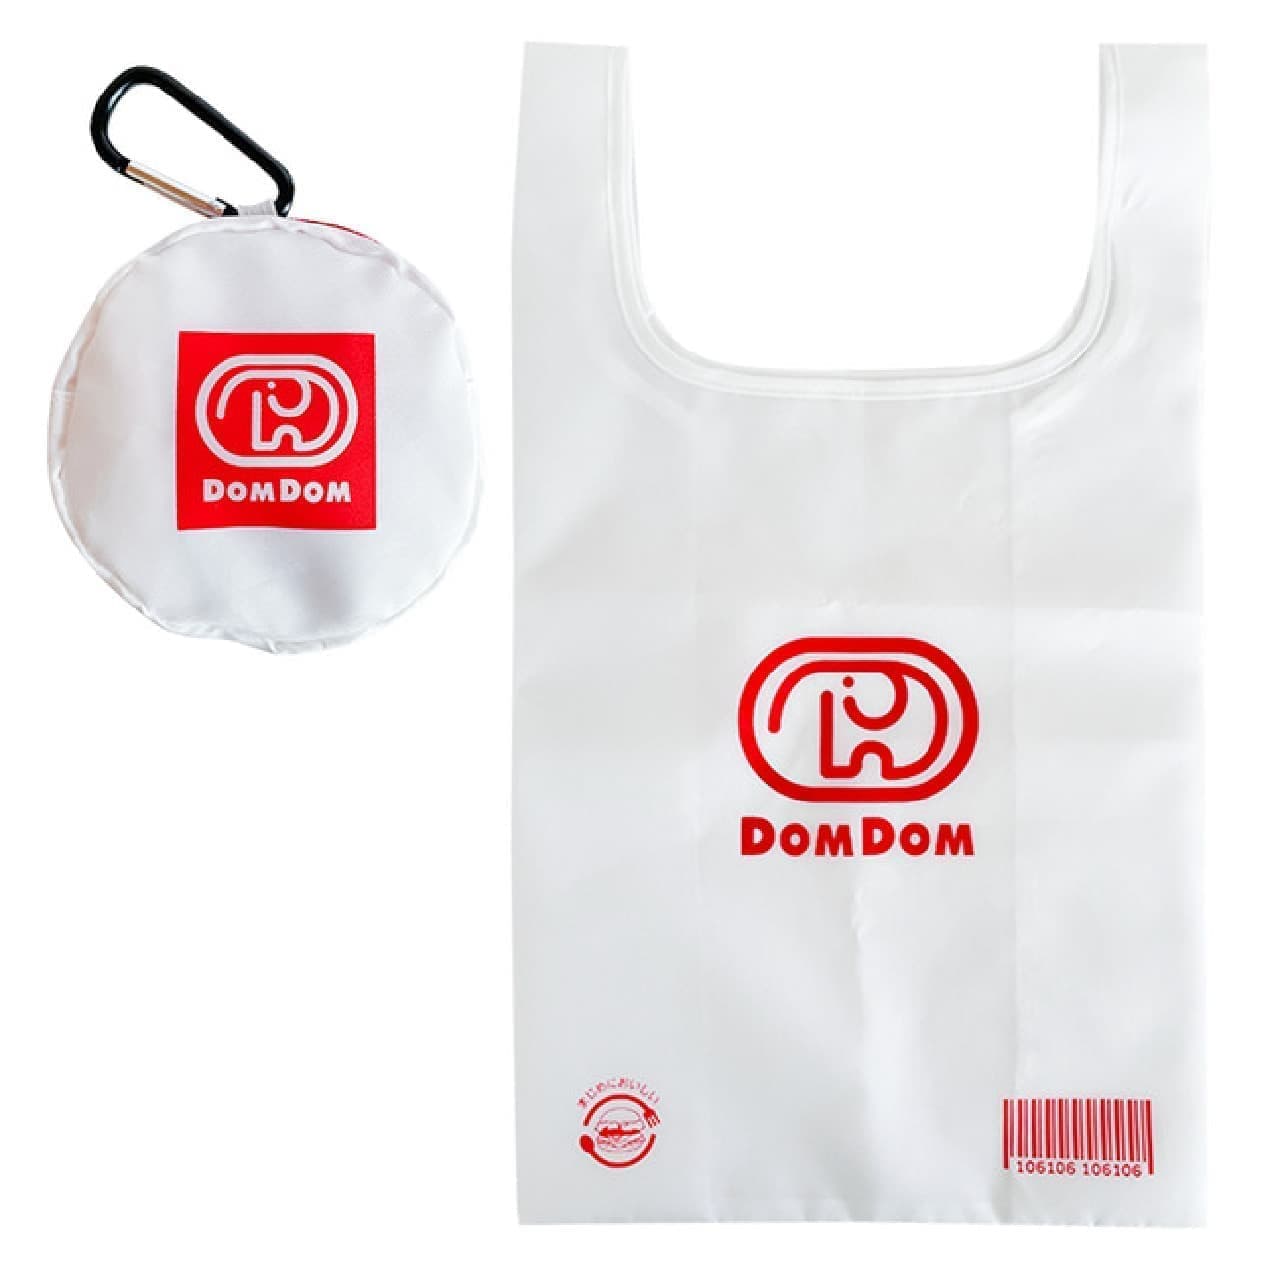 Five kinds of cute "Domdomdom Goods" featuring Domuso-kun at post offices, including a pouch with ears and a plastic bag-like eco-bag